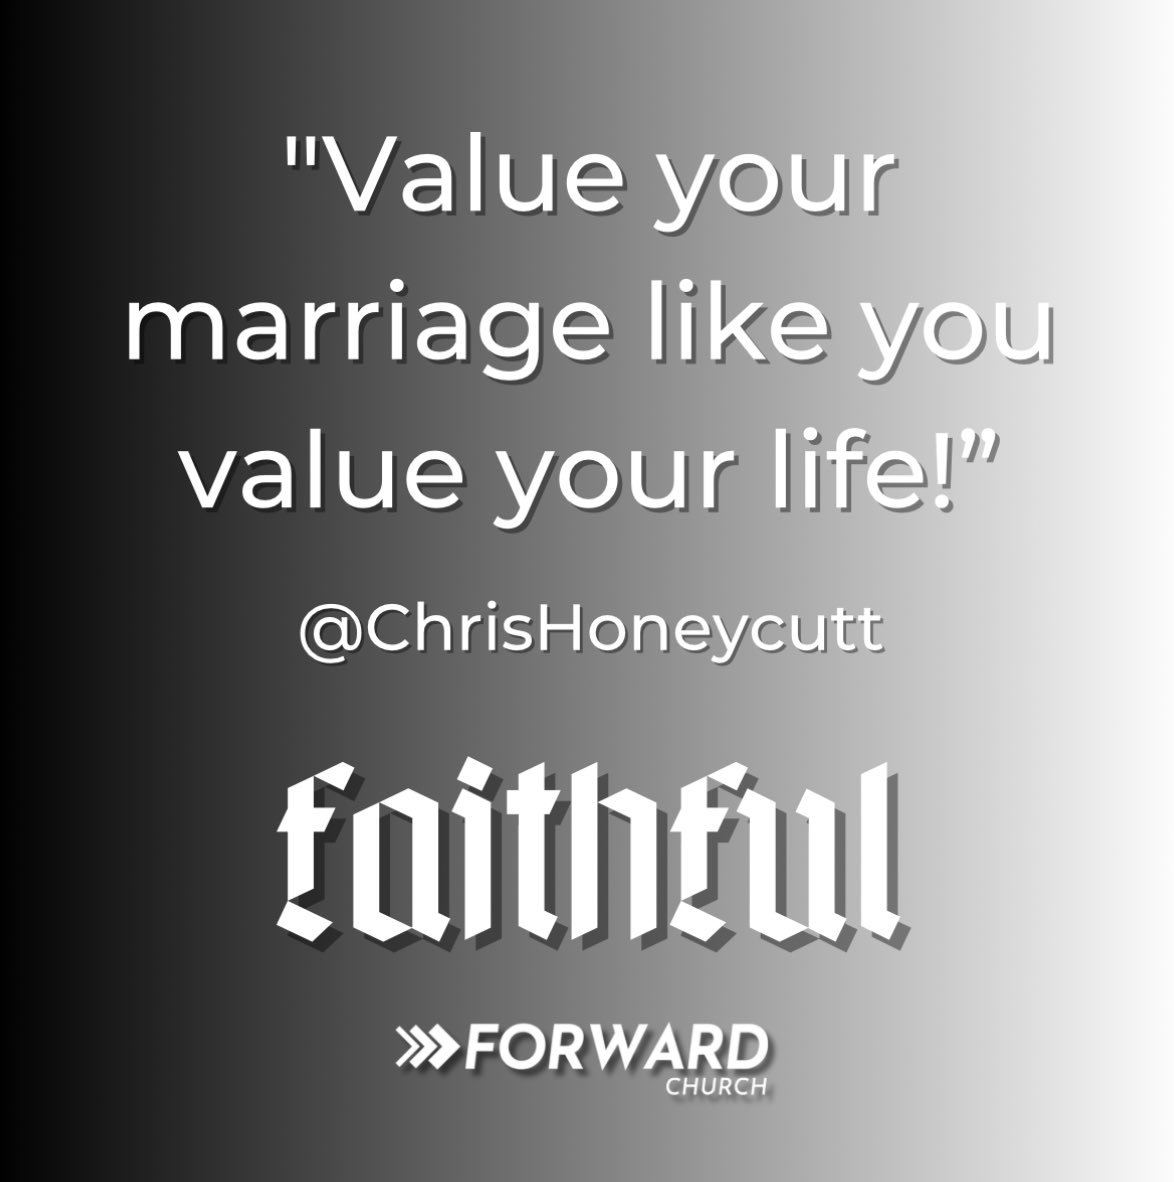 Marriage isn’t just another relationship! 🤵‍♂️👰‍♀️

We must revere it and treat it differently. Value your marriage like you would your own life! 

Feed it. 🍽️
Fund it. 💵
Preserve it. 🏥
Protect it. ⚔️
Cherish it. 💖
Celebrate it. 🎉

#marriage #marriagegoals #faithful #MyrtleBeach